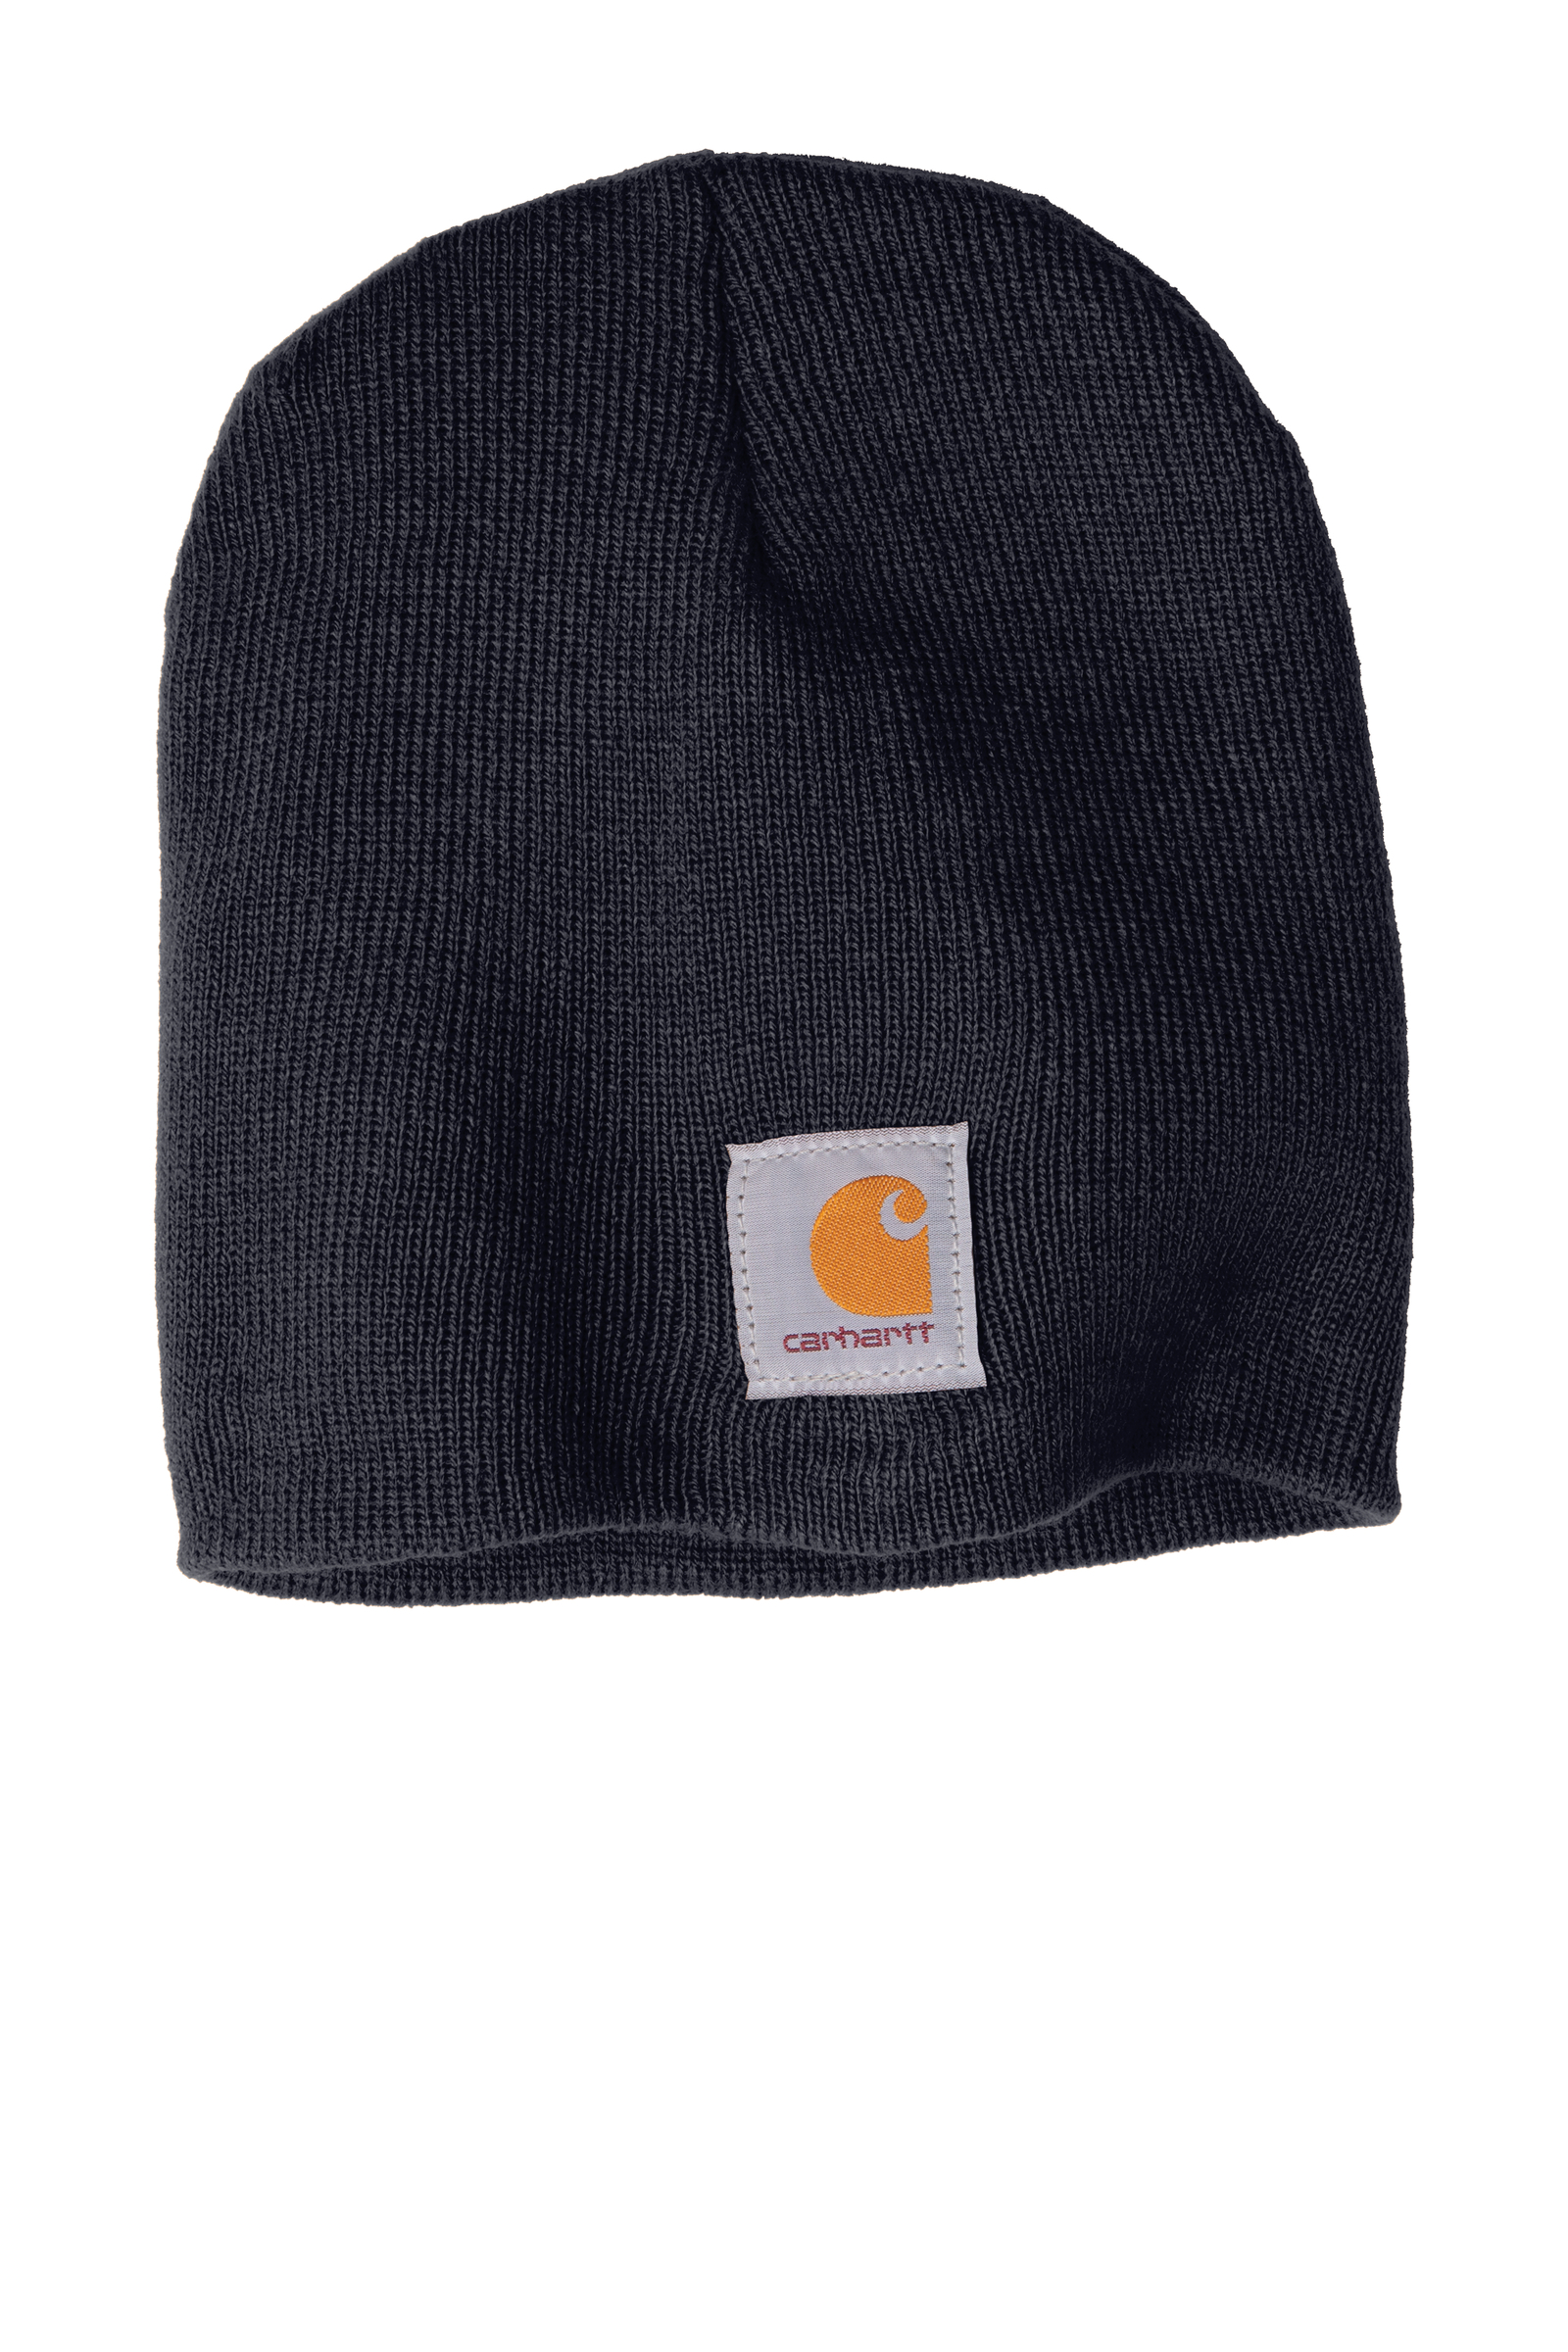 Carhartt Embroidered Acrylic Knit Hat